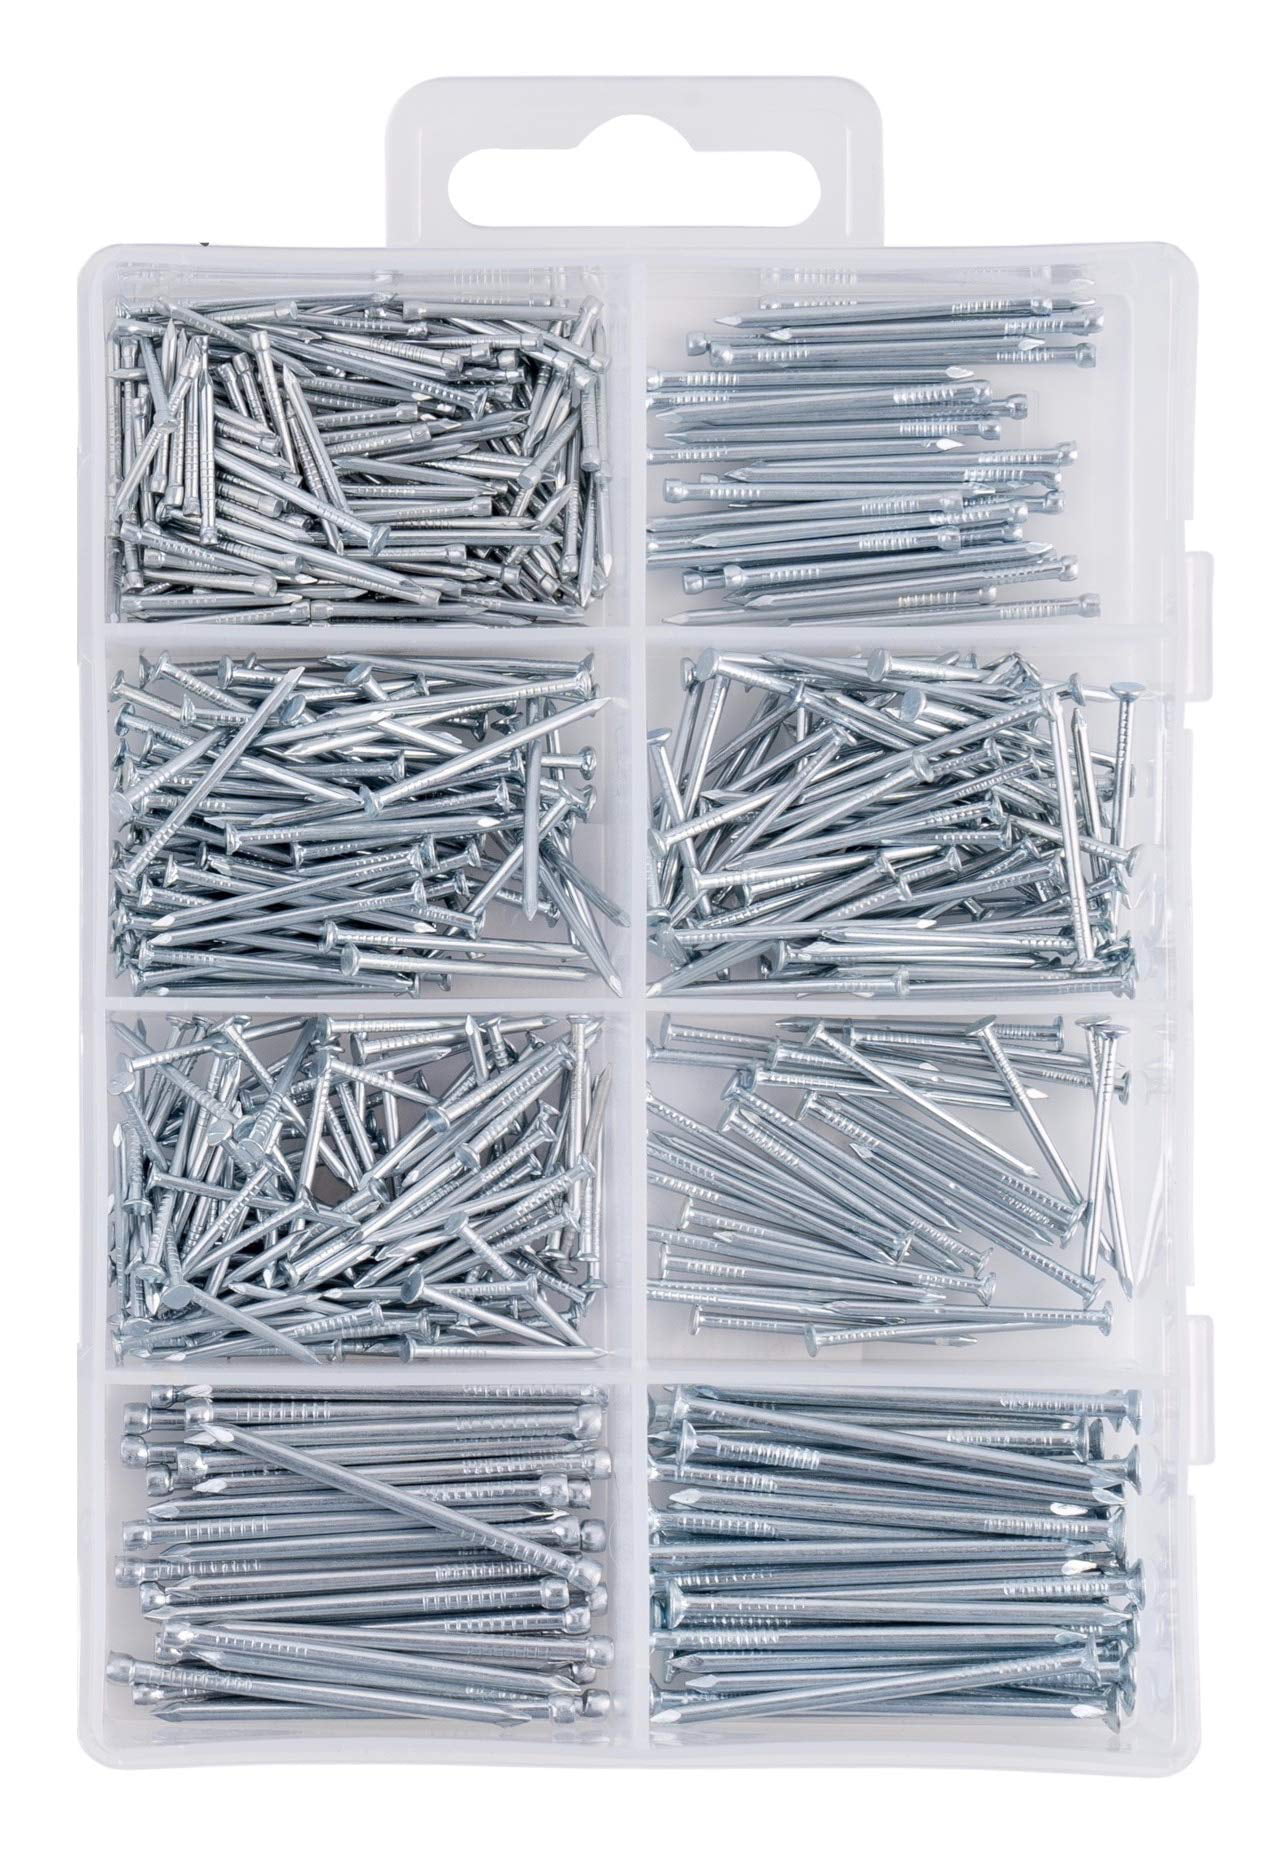 Hardware Nail Assortment Kit Includes Finish Wire Common Brad Home Garden Tools 